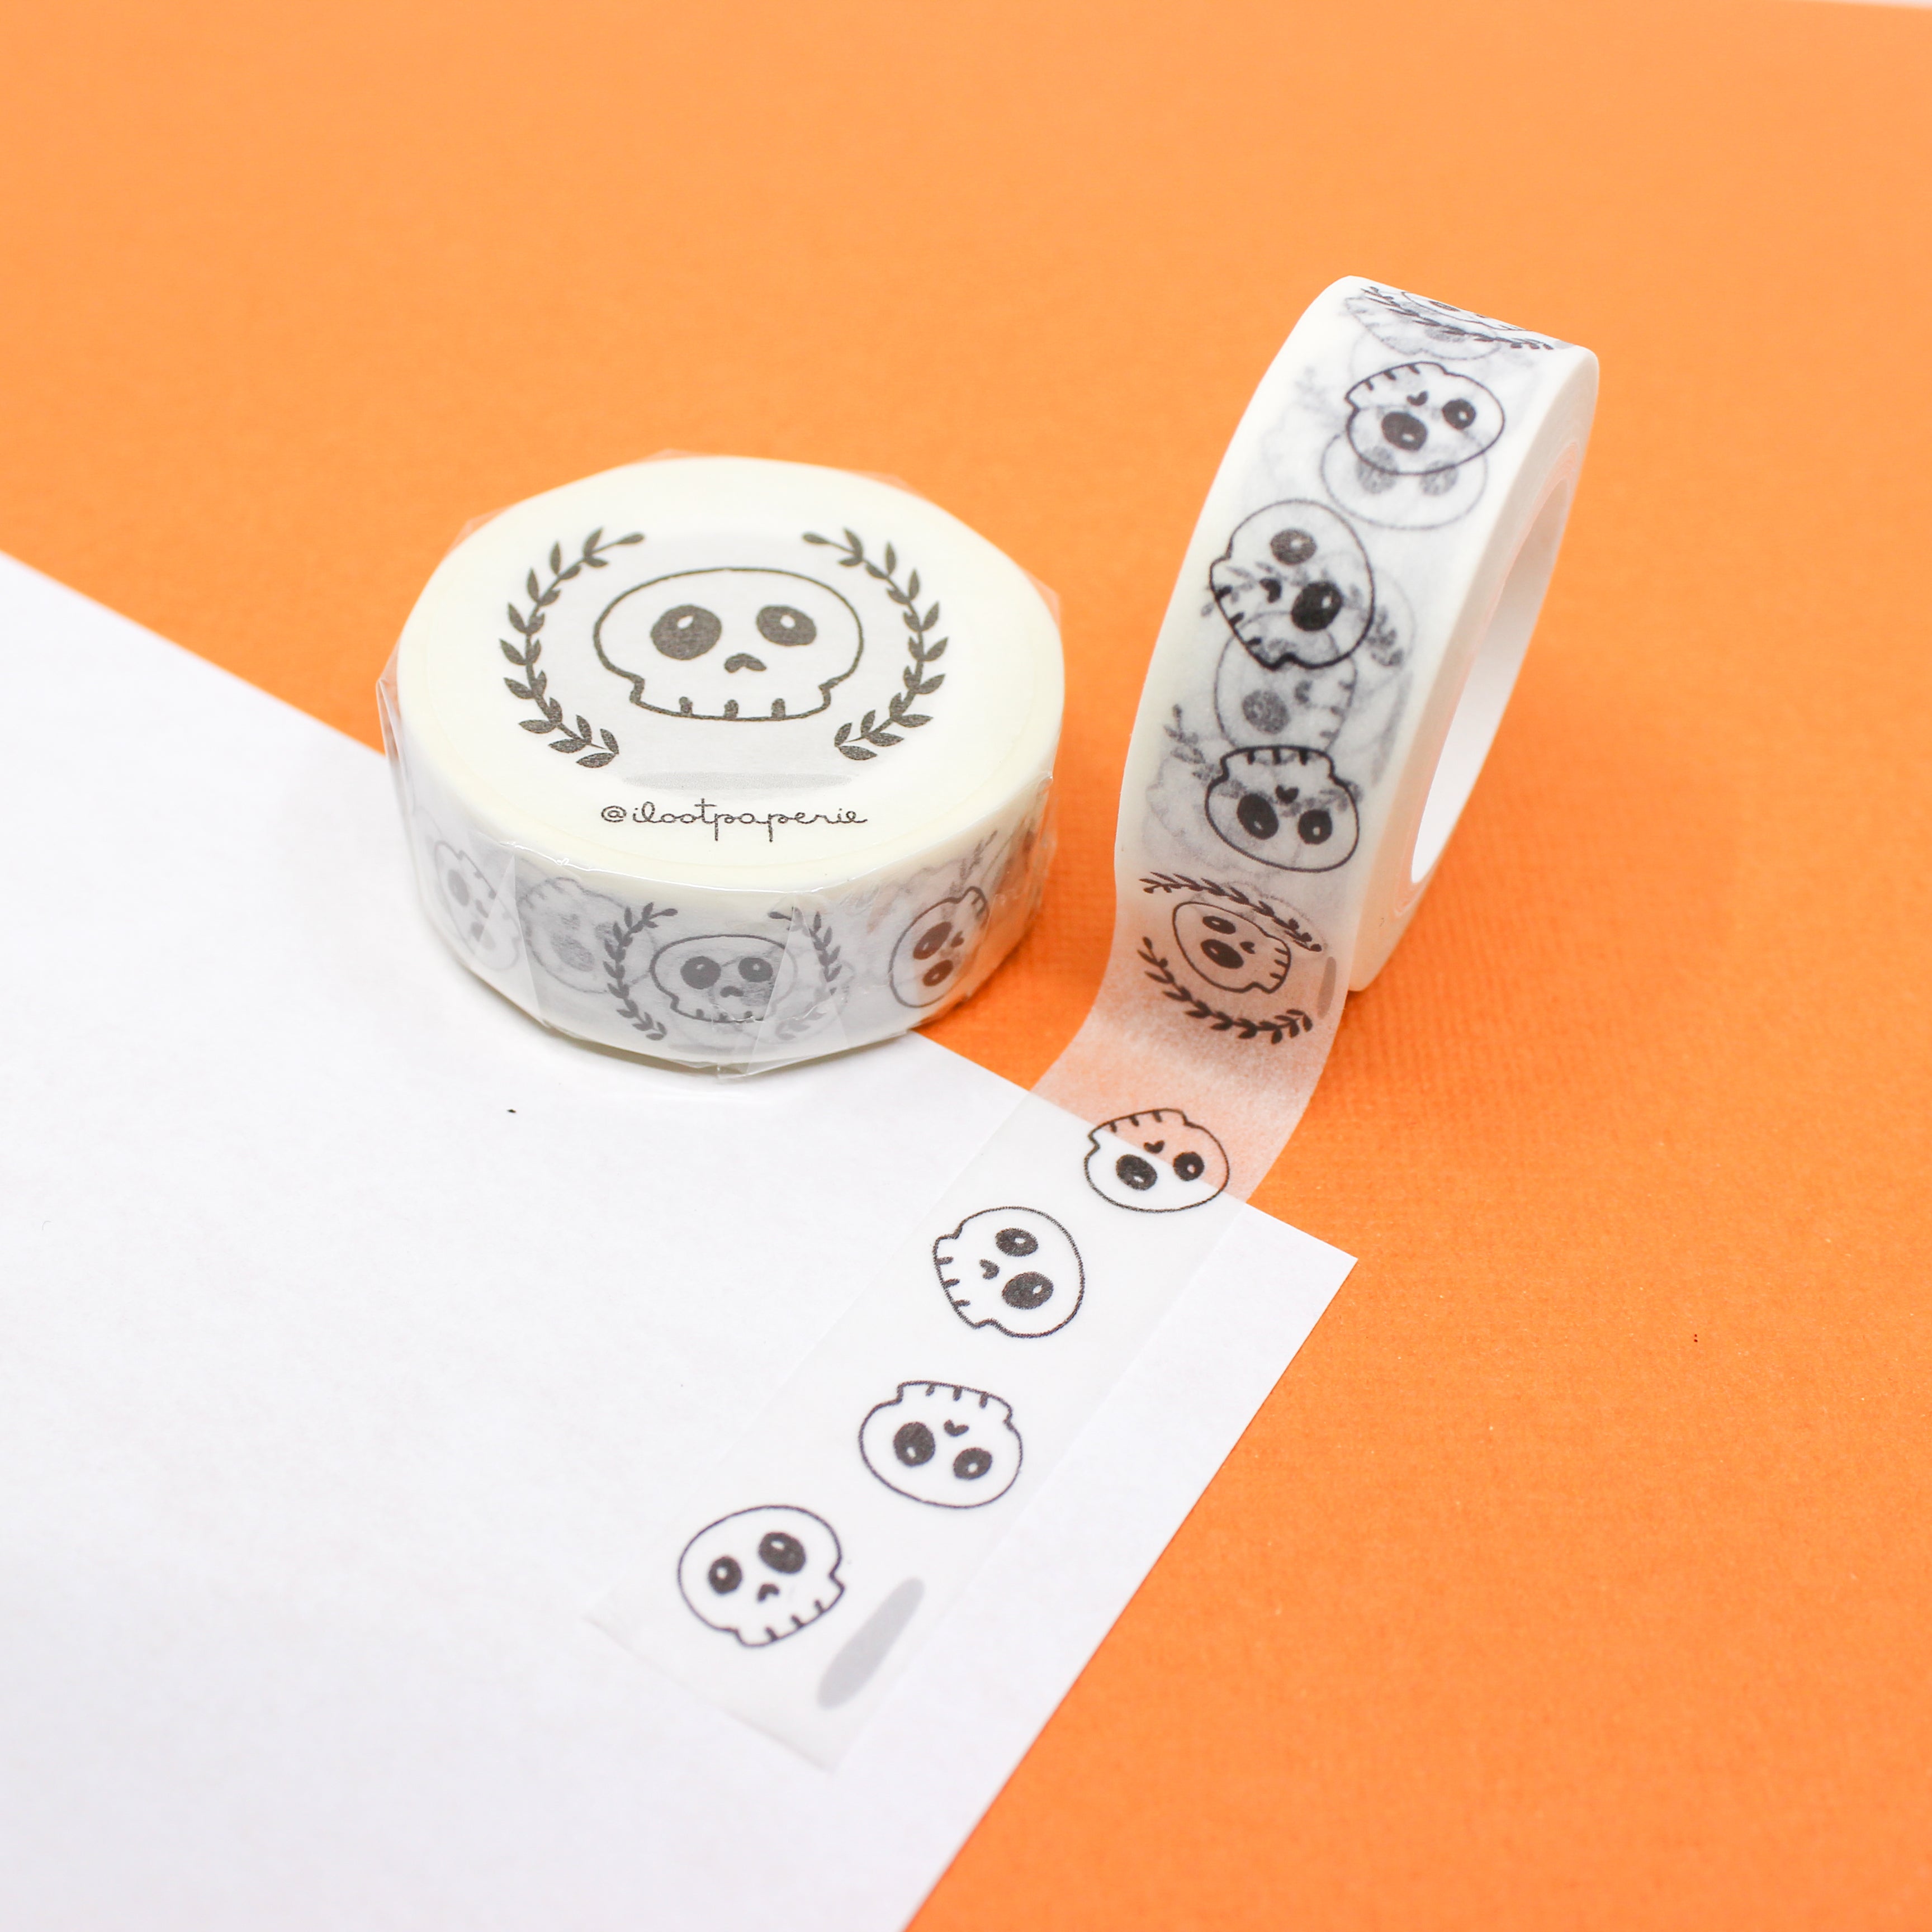 This is a cute skull themed washi tape from BBB Supplies Craft Shop